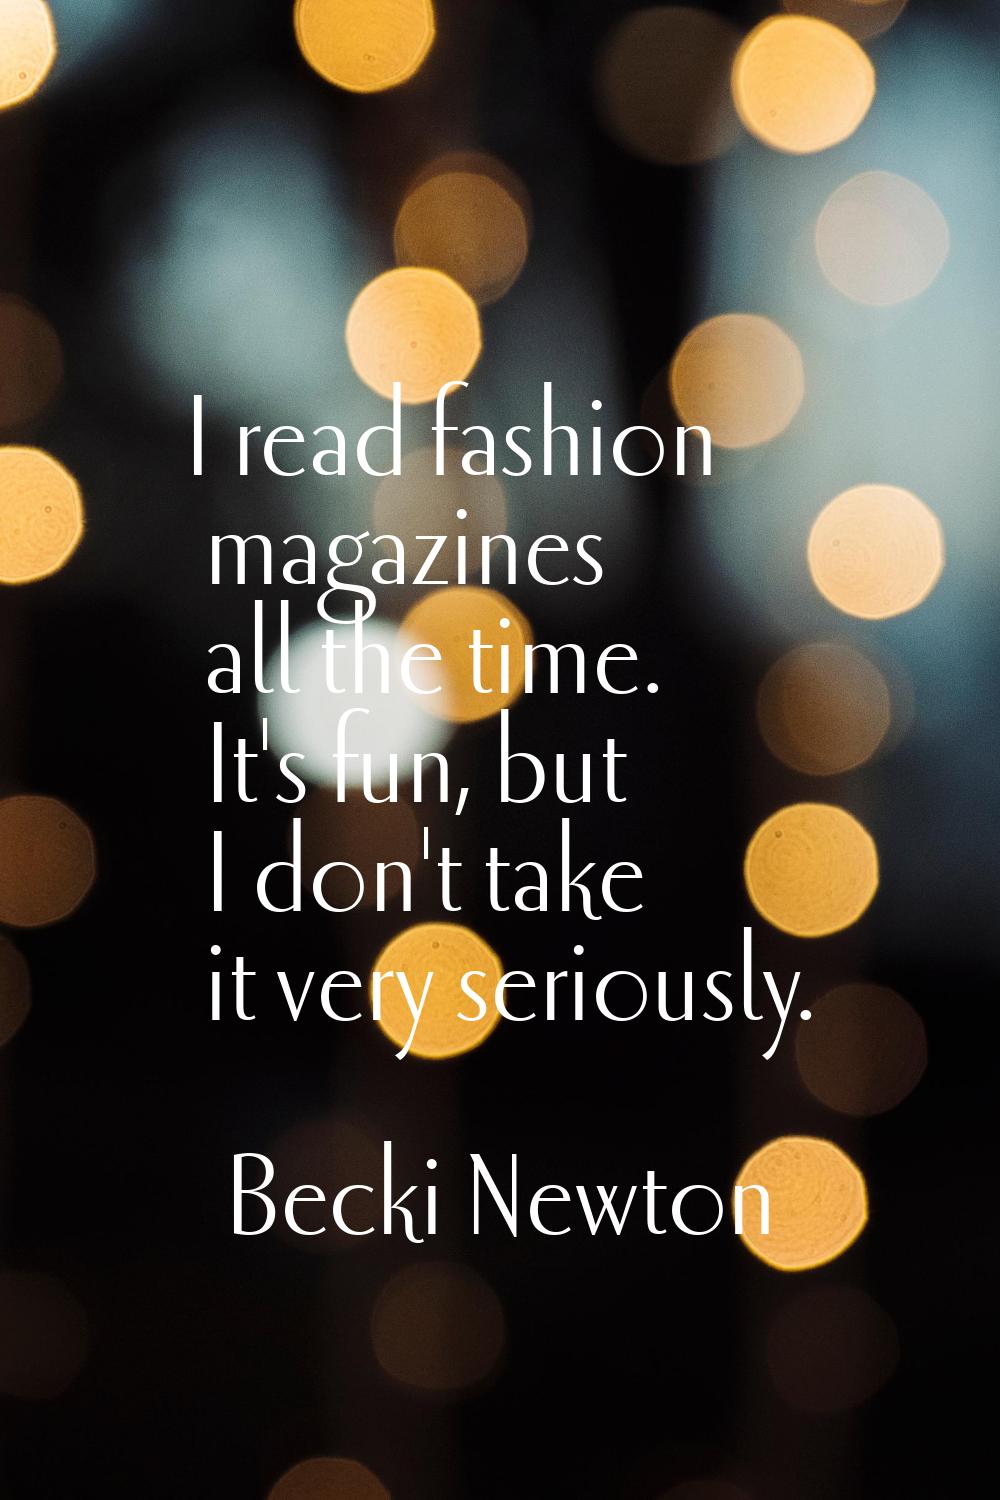 I read fashion magazines all the time. It's fun, but I don't take it very seriously.